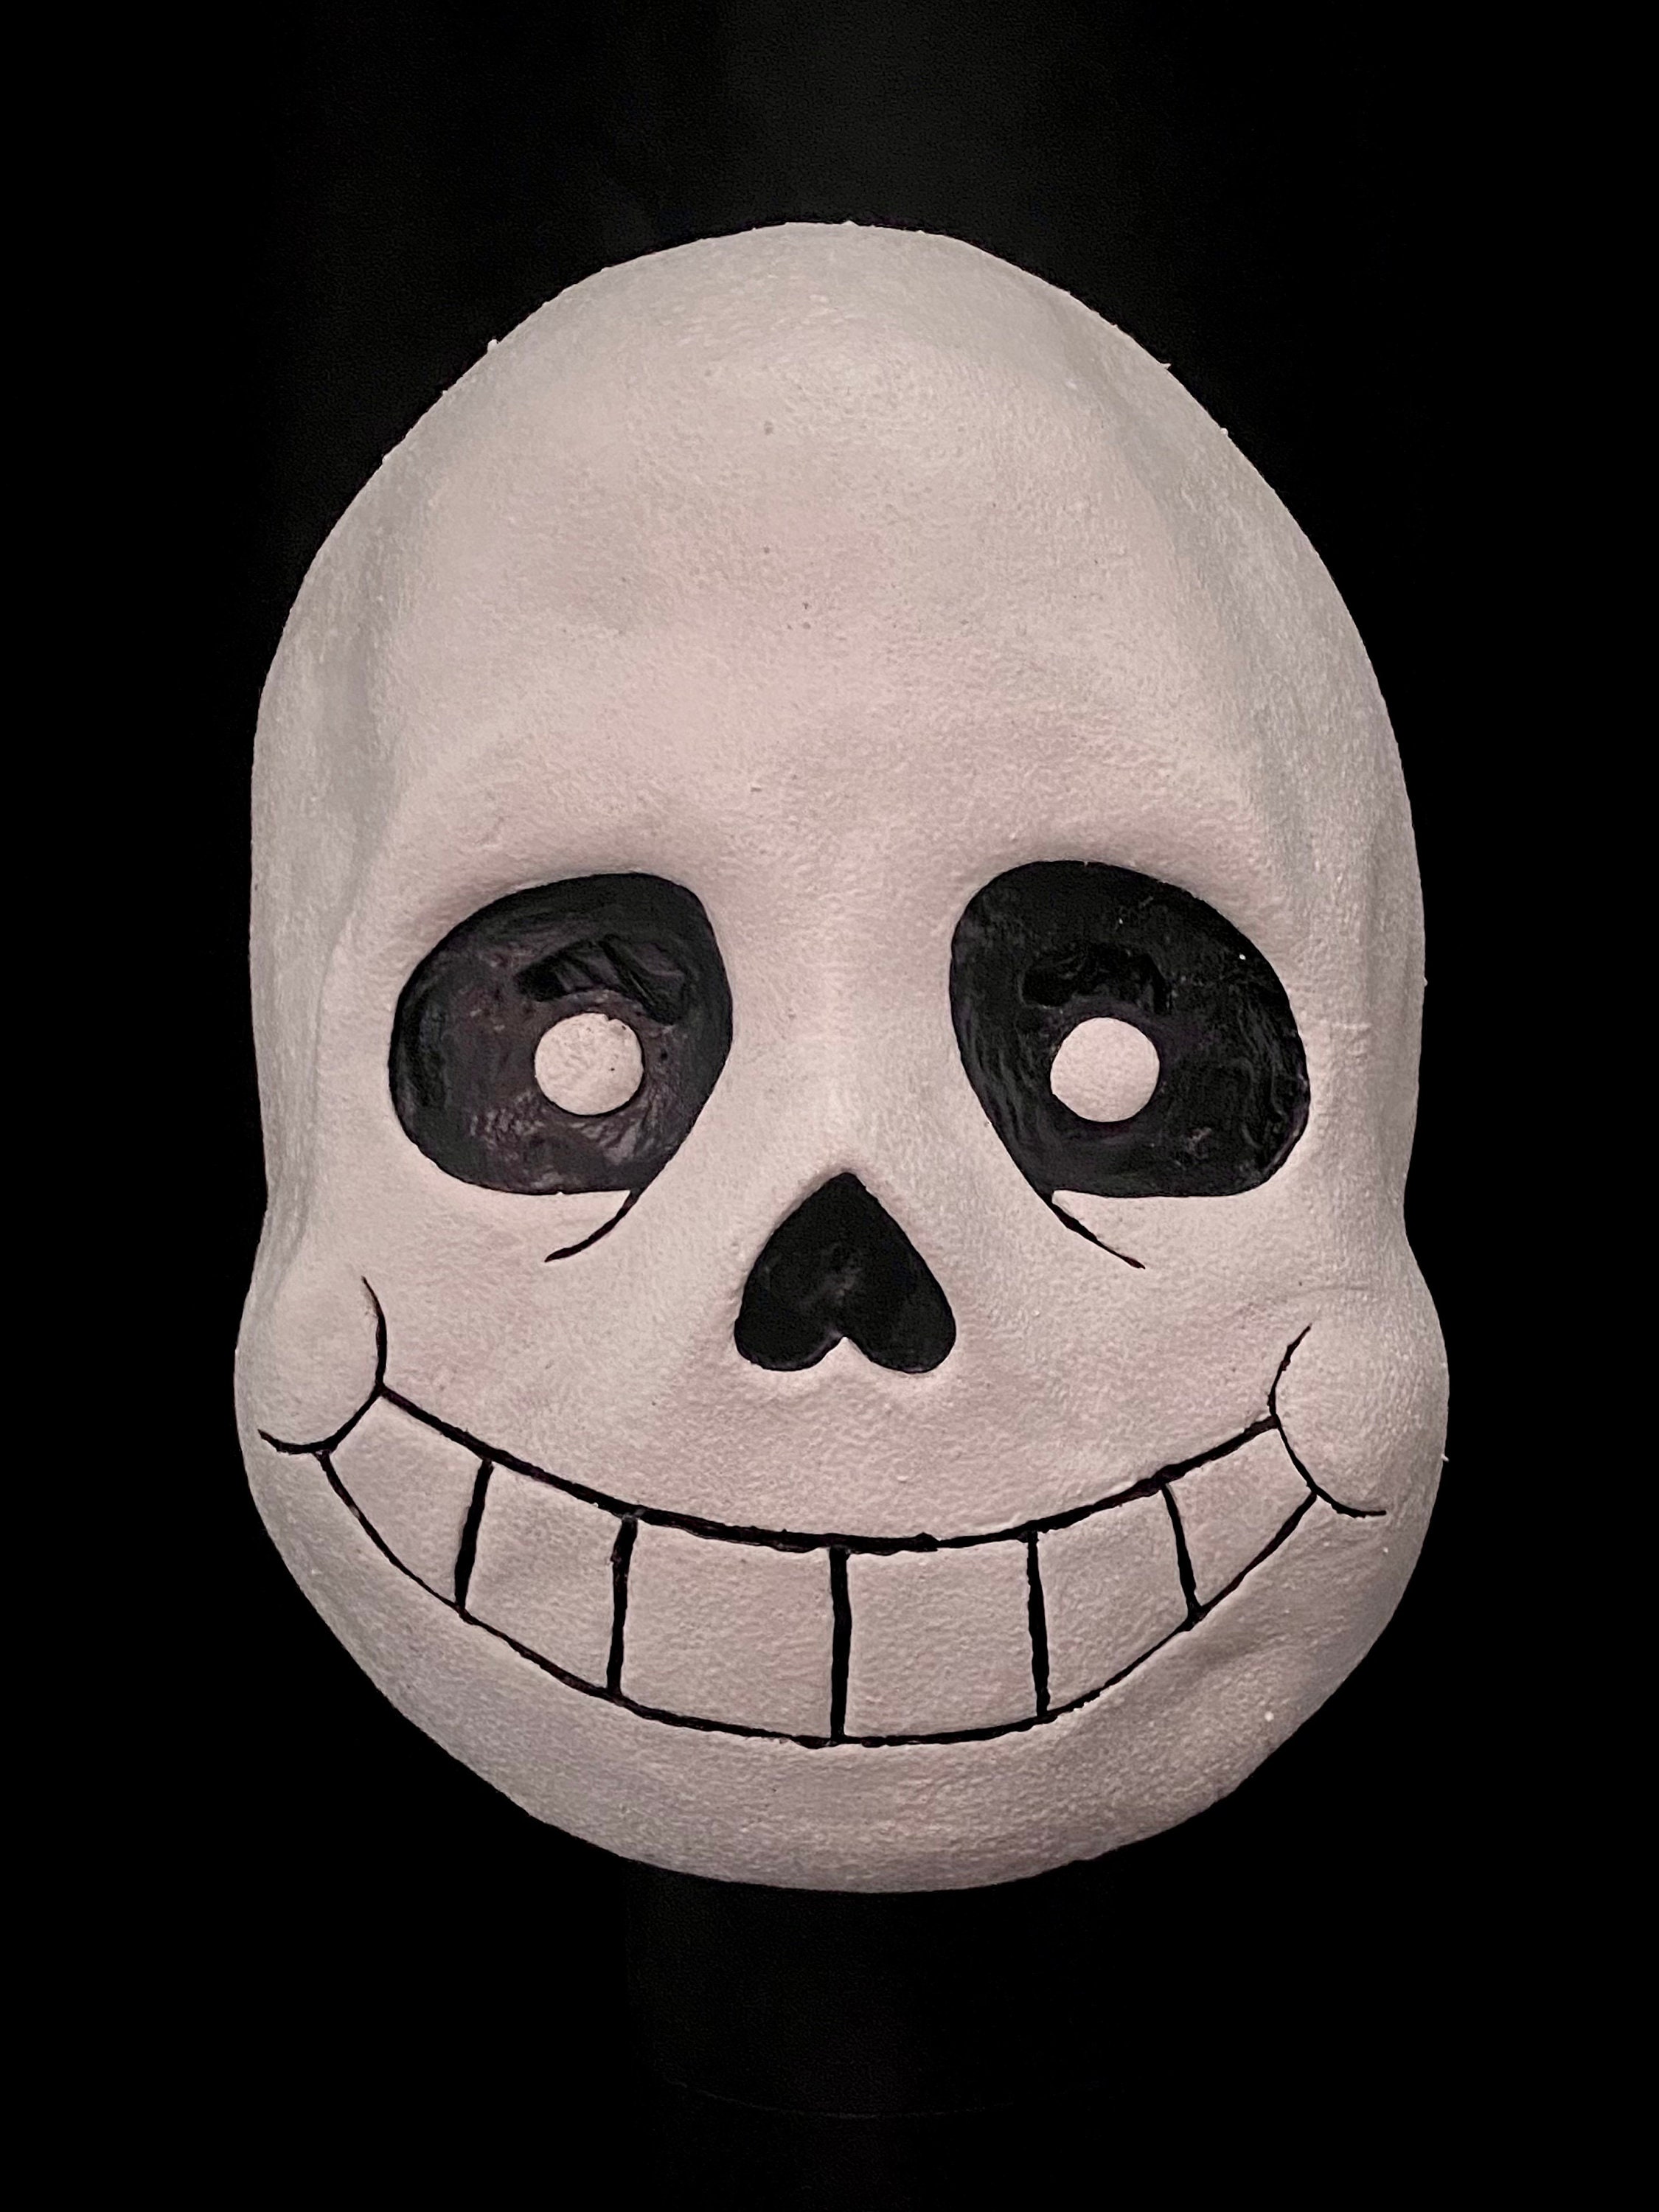 Make Your Own Ink Sans Costume  Undertale cosplay, Sans cosplay, Anime  undertale